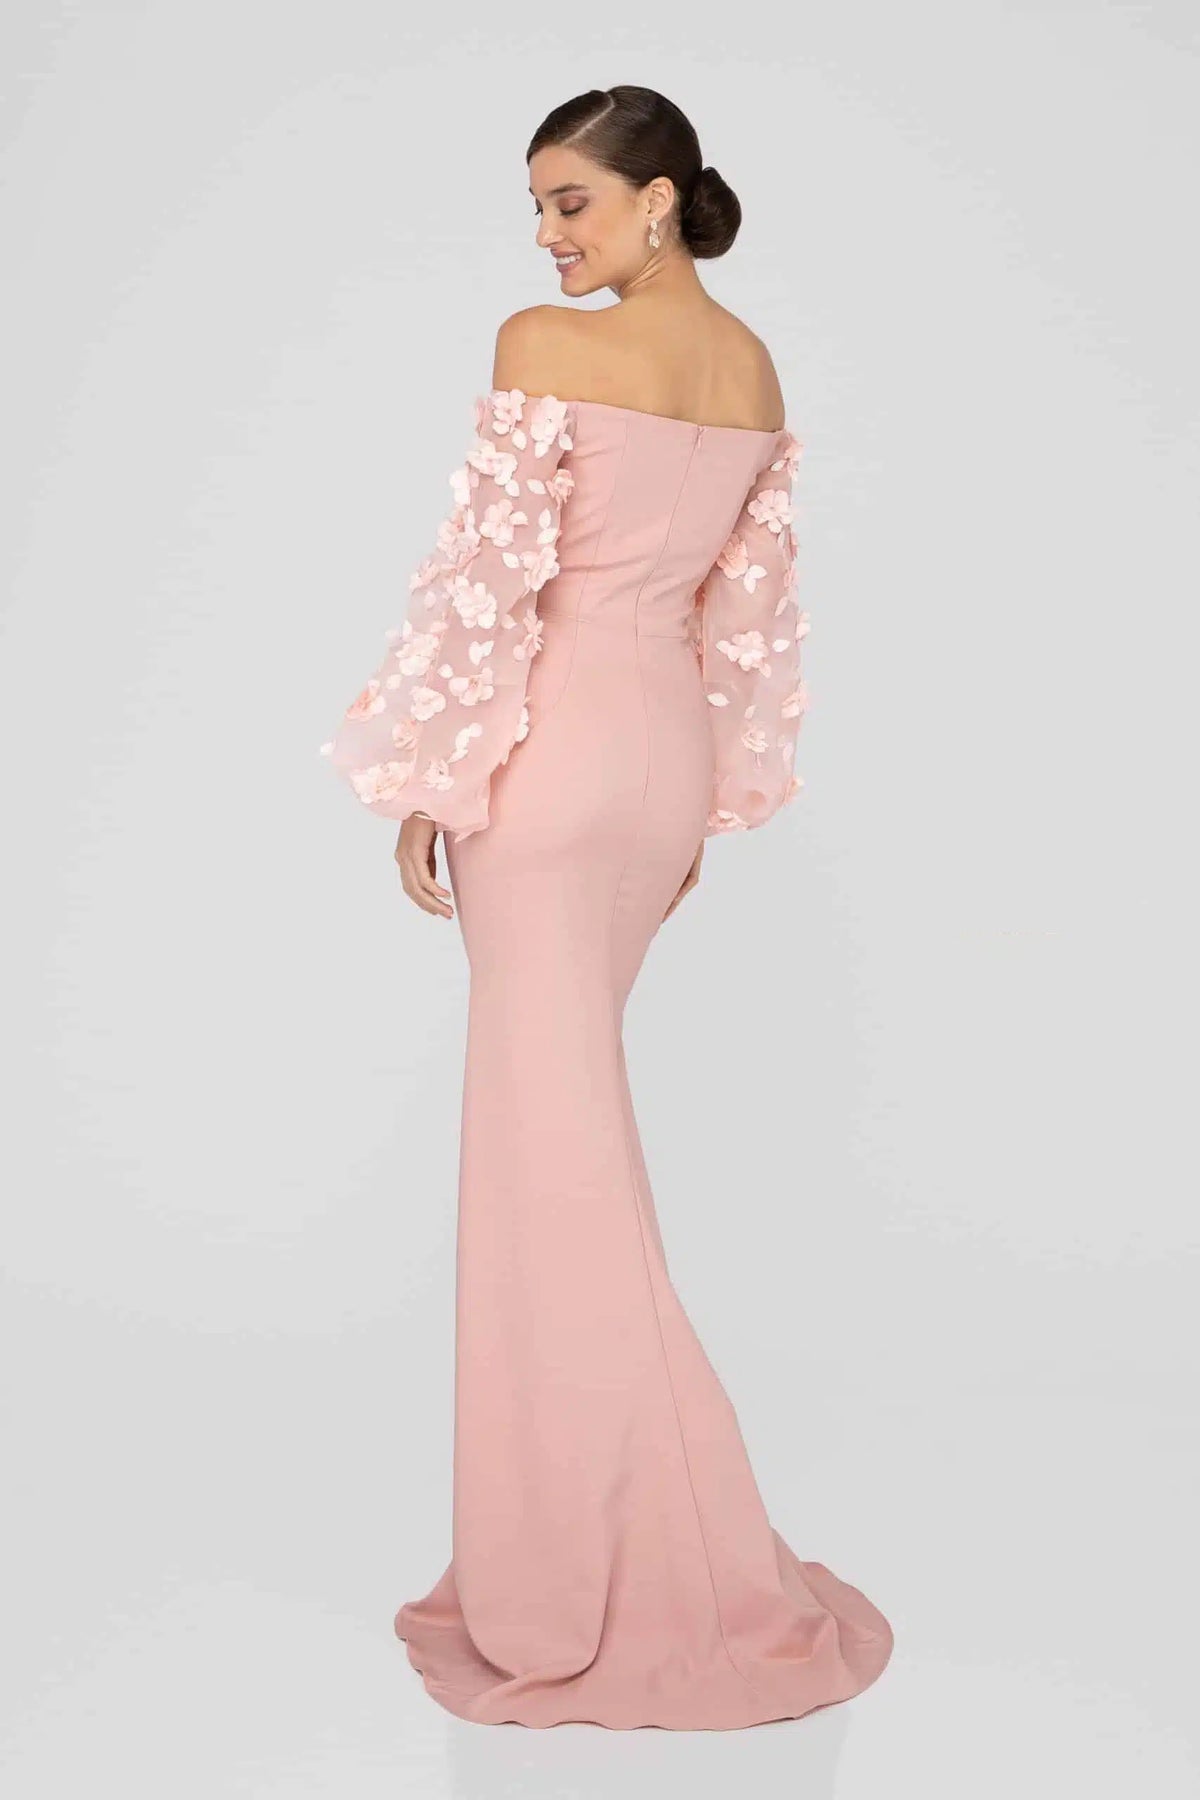 Terani Couture 1911E9128 Off Shoulder Floral Accent Puff Sleeves Gown in 2 Way Stretch Satin, perfect for mother of the bride or groom. Adorned with 3D flowers on organza sleeves.  Dresses Color is blush.